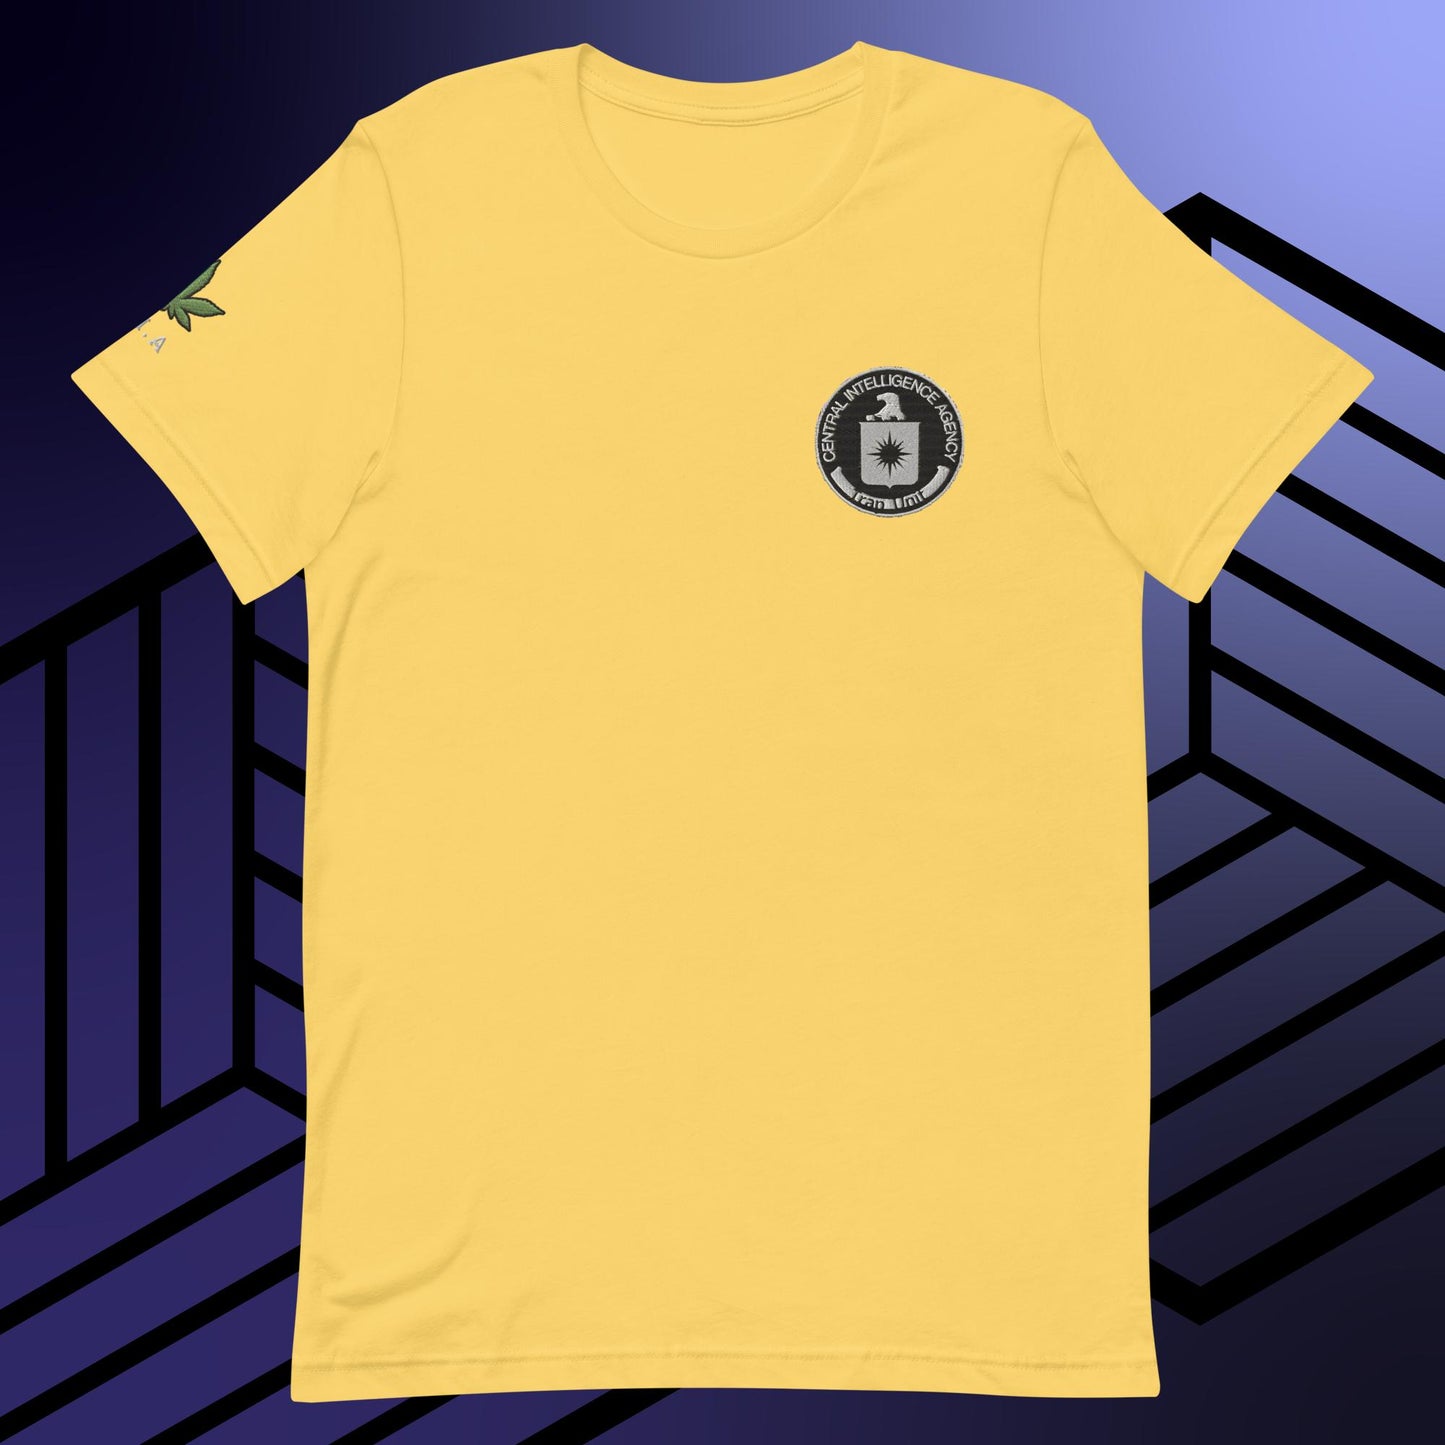 a yellow t - shirt with a black and white logo